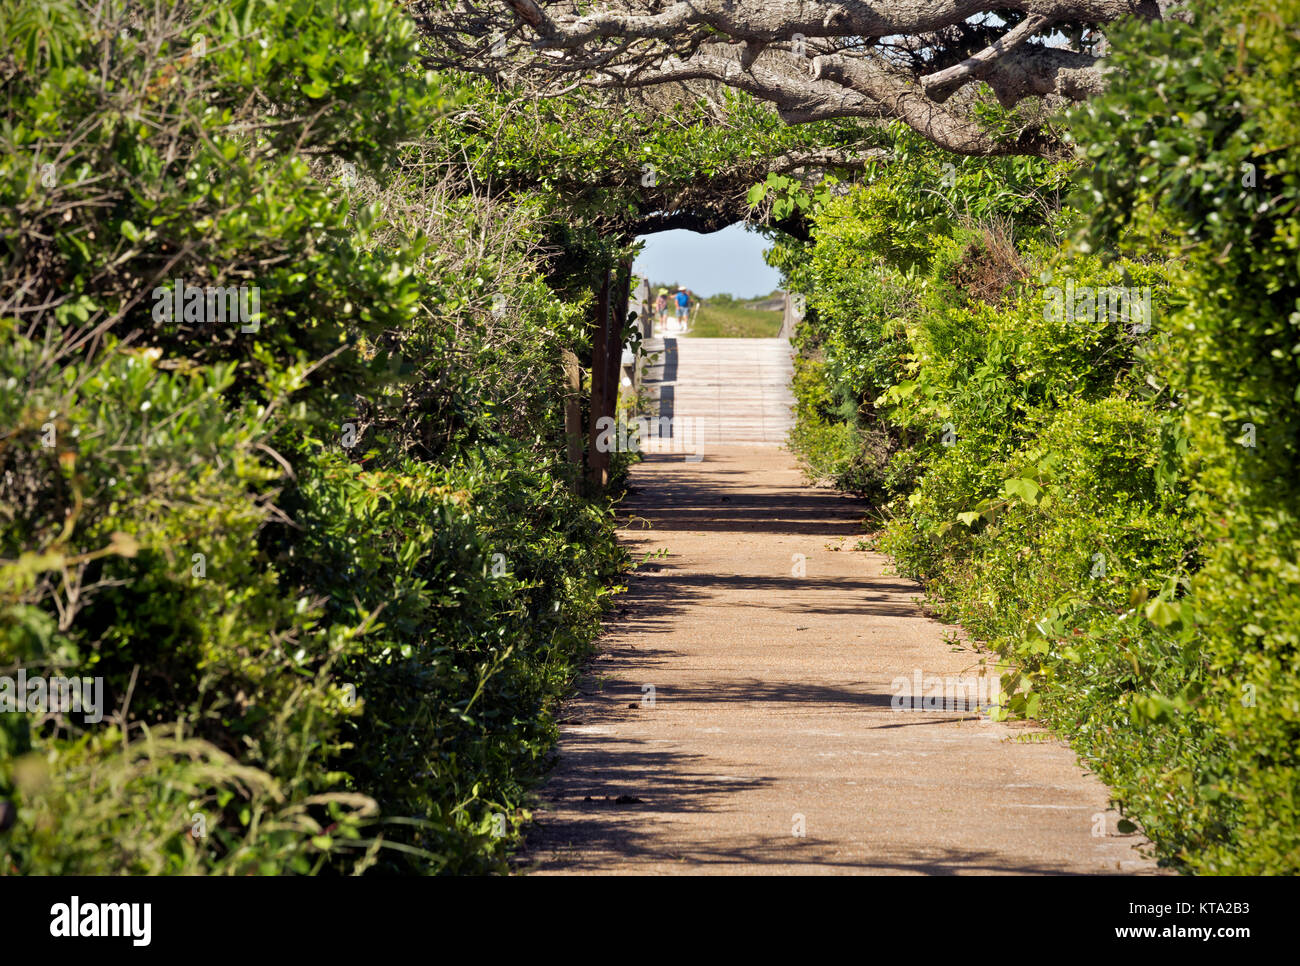 NC01155-00...NORTH CAROLINA - Trail at the Pea Island National Wildlife Refuge located on the Outer Banks. Stock Photo